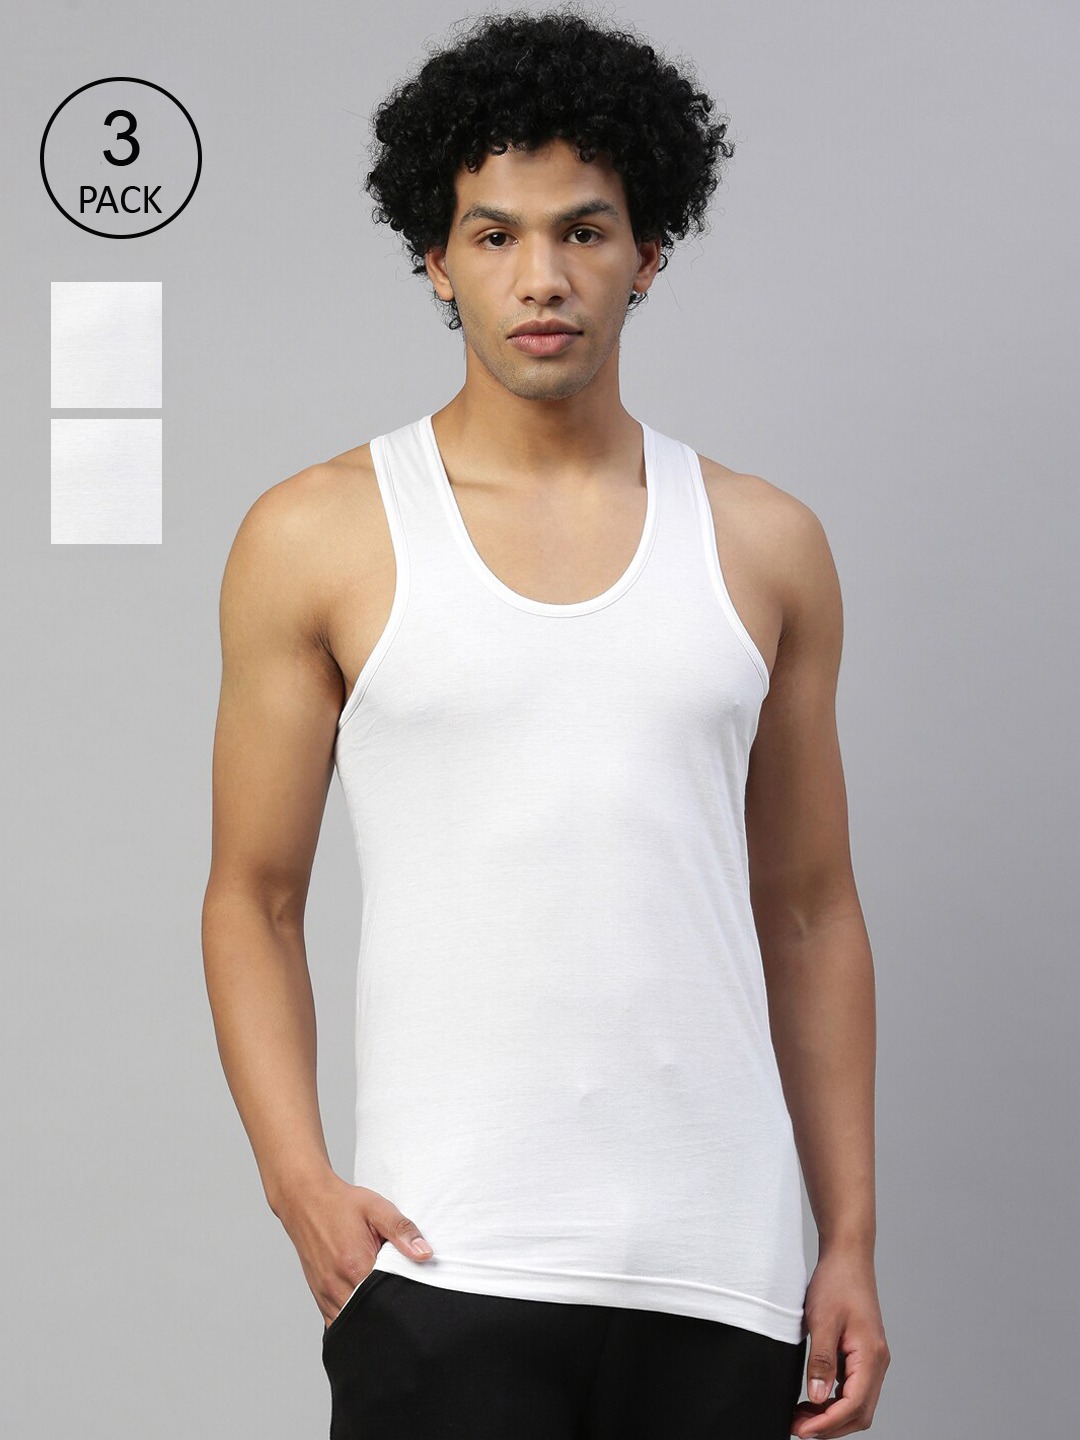 Clothing Innerwear Vests | DIXCY SCOTT MAXIMUS Men Pack Of 3 White Solid Pure Cotton Innerwear Gym Vests MAXV-001-ICON VEST-P3 - ZP15351